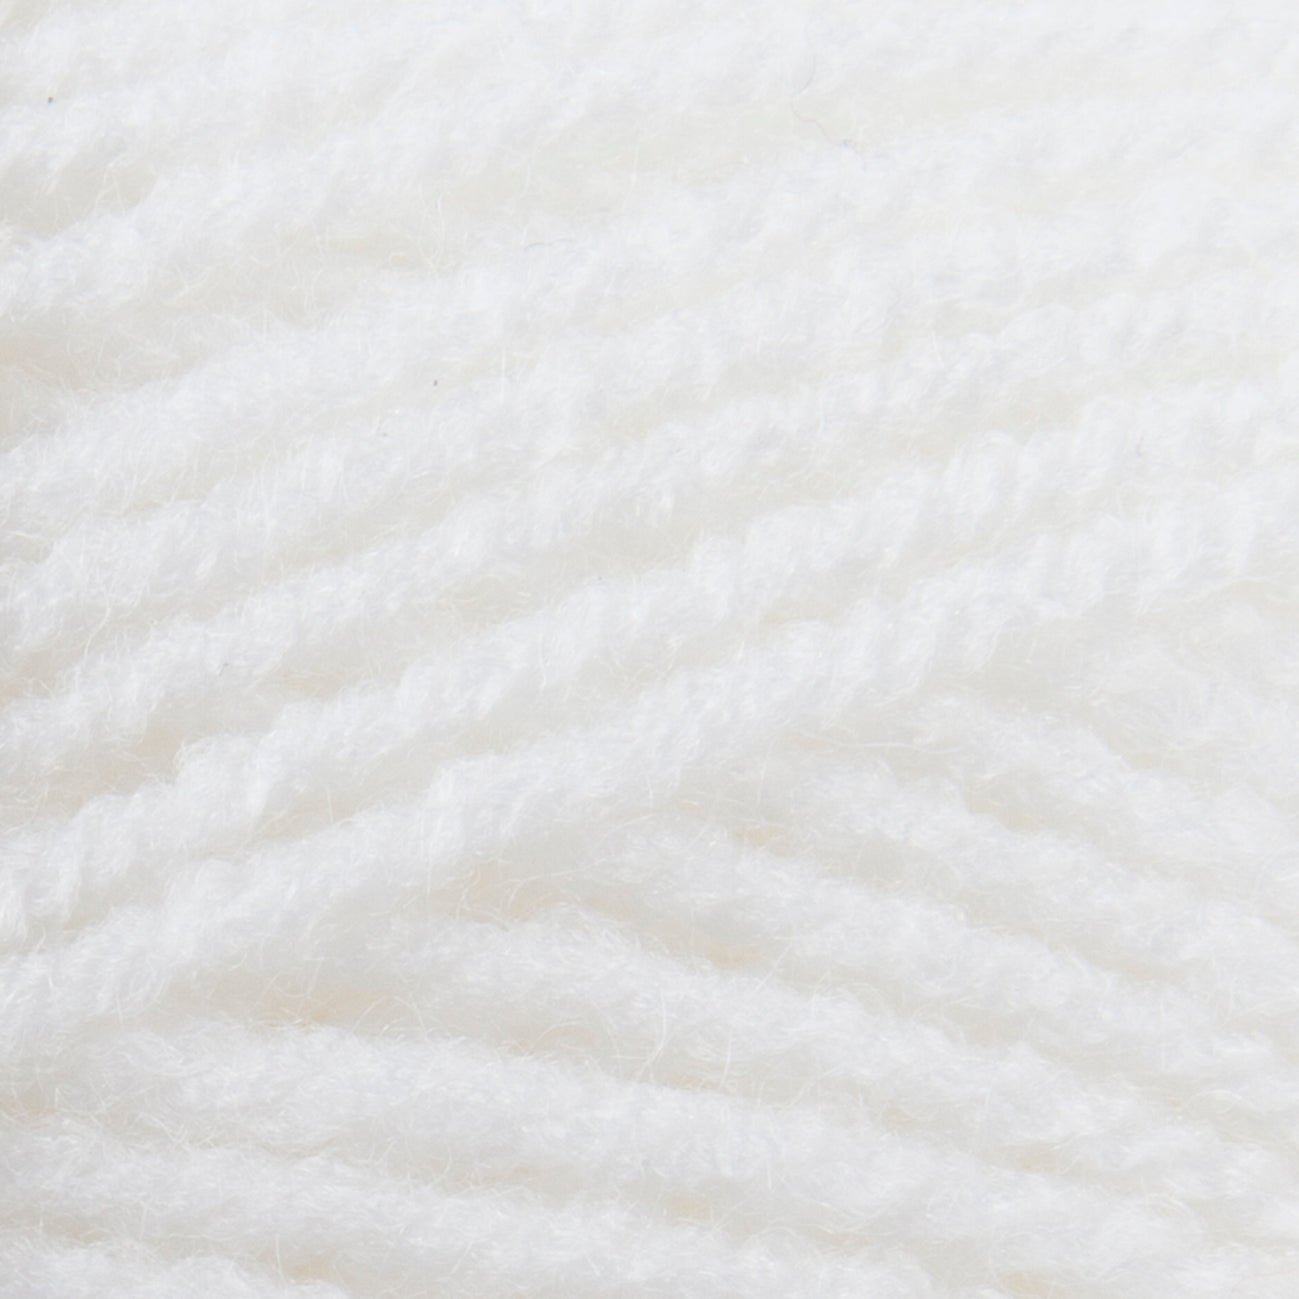 Fairytale: Fab: Double Knitting: 50g: White